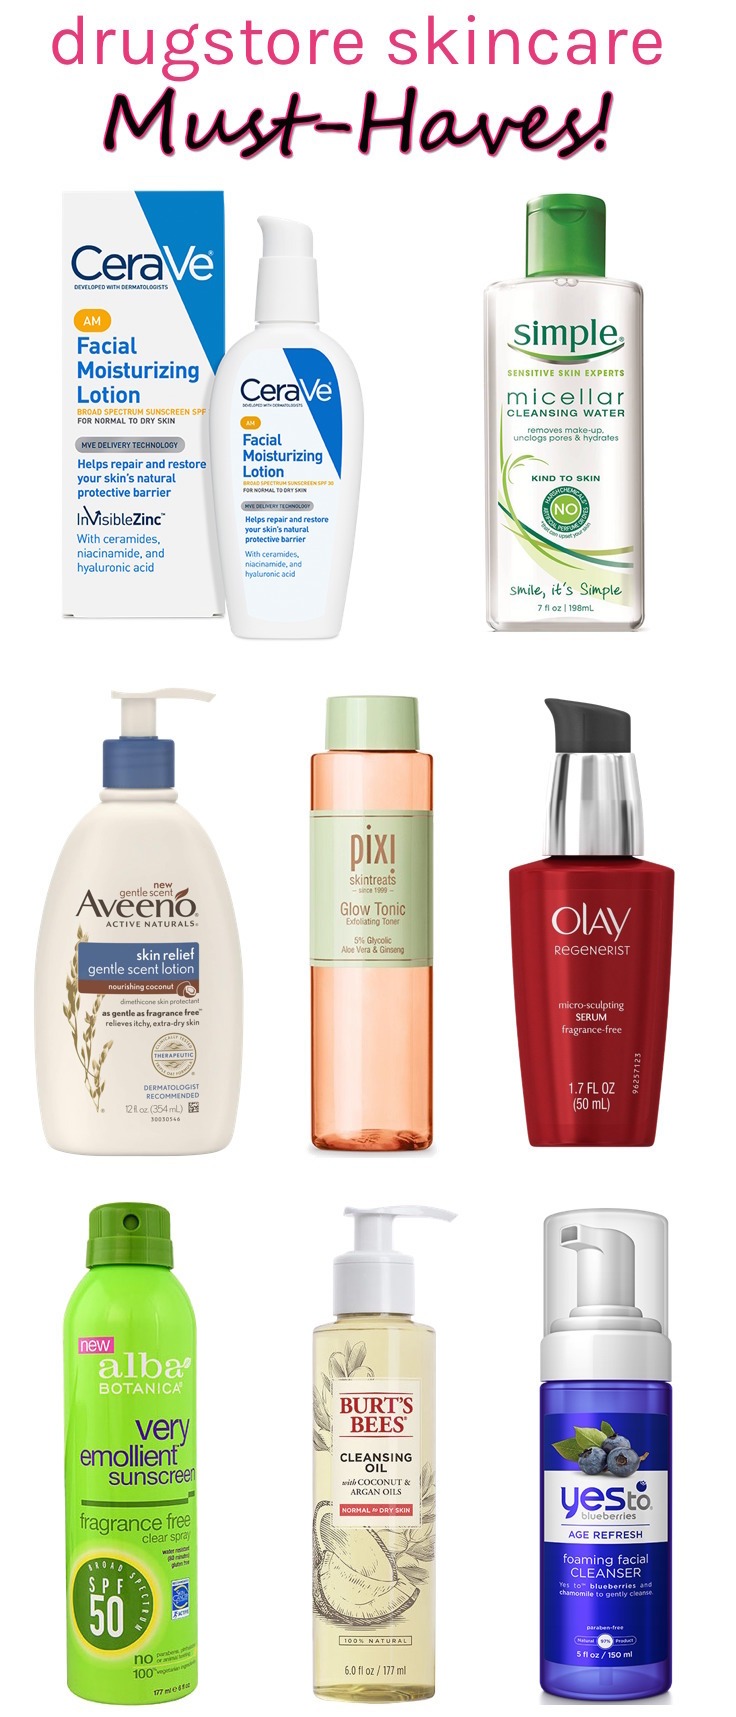 The Best Drugstore Skincare Products For Dry, Sensitive Skin | Click through for 8 tried-and-tested drugstore skincare must-haves under $20!